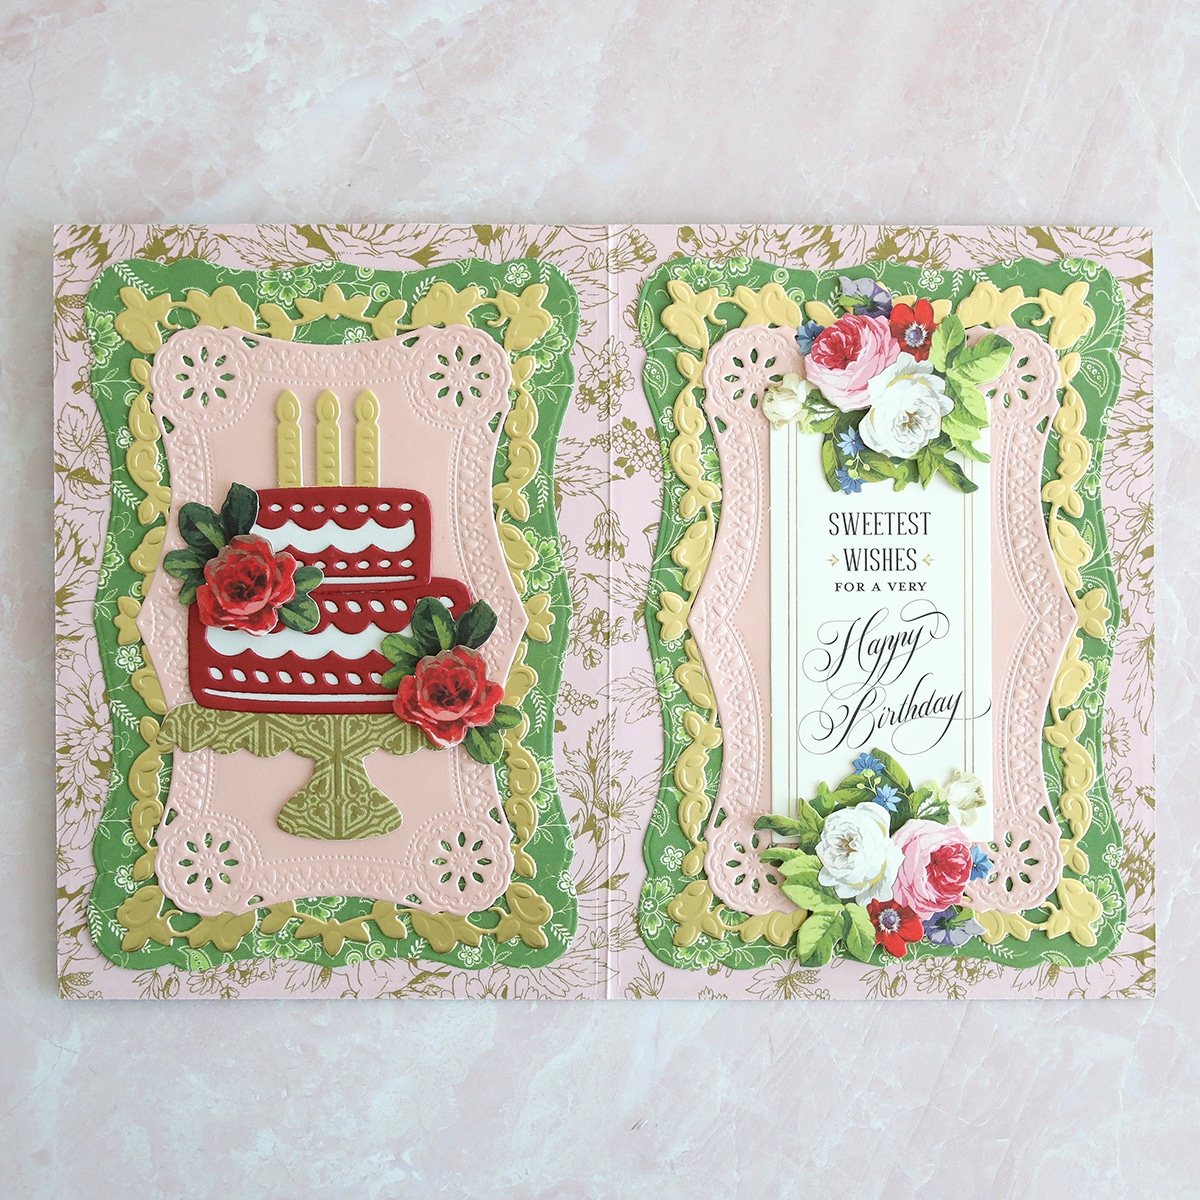 A birthday card with a cake and flowers.